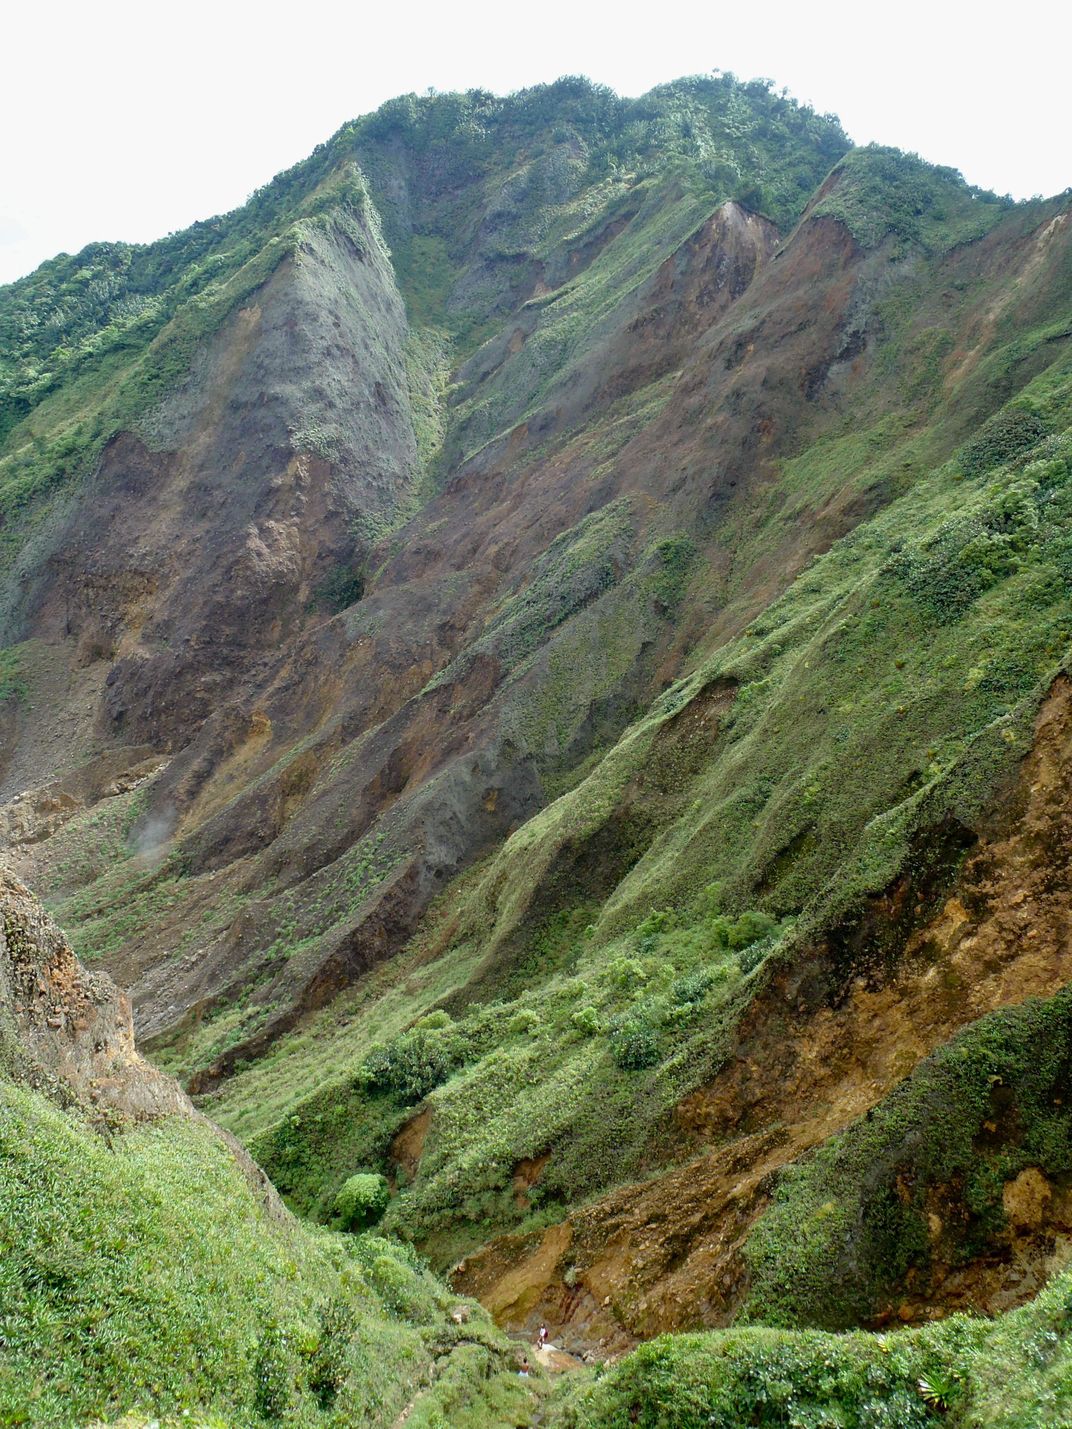 Hiking In The Valley Of Desolation To The Boiling Lake Of Dominica Try To Find The People In